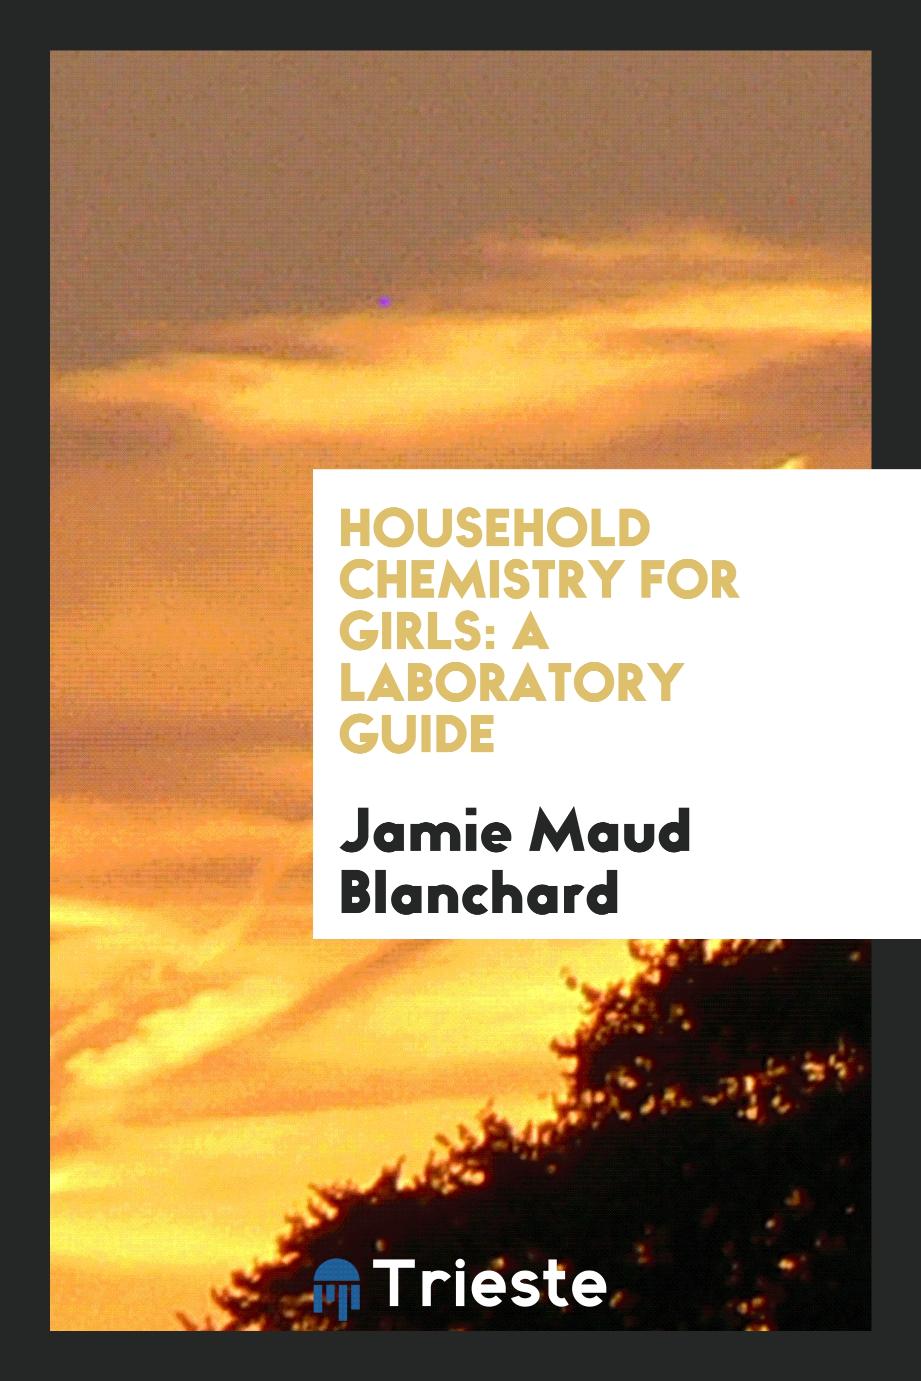 Household Chemistry for Girls: A Laboratory Guide